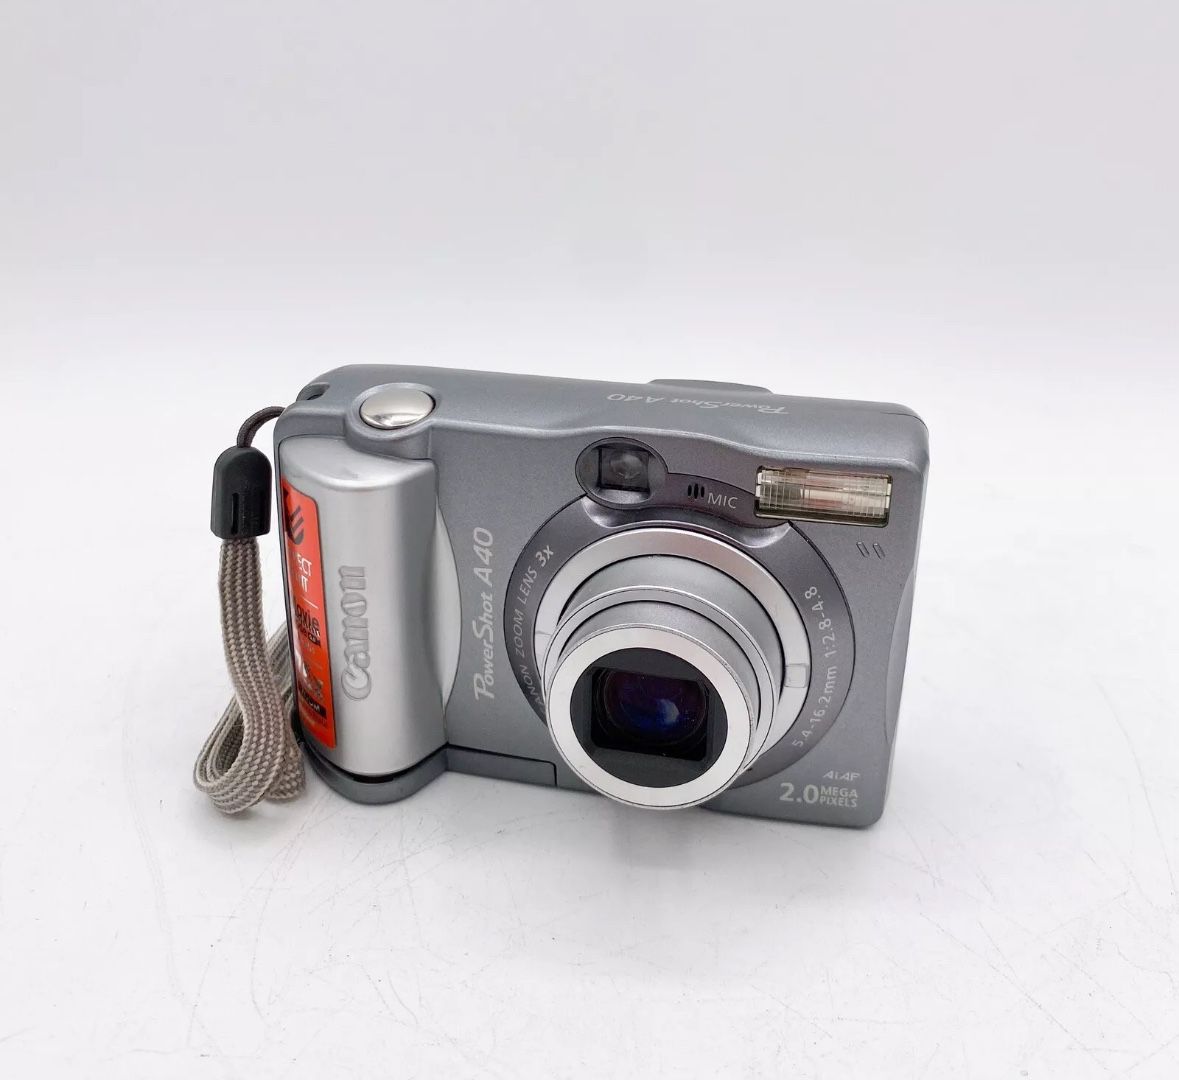 Canon Digital Camera PowerShot A40 2.0MP 7.5x Zoom Silver Tested WORKING PC1019